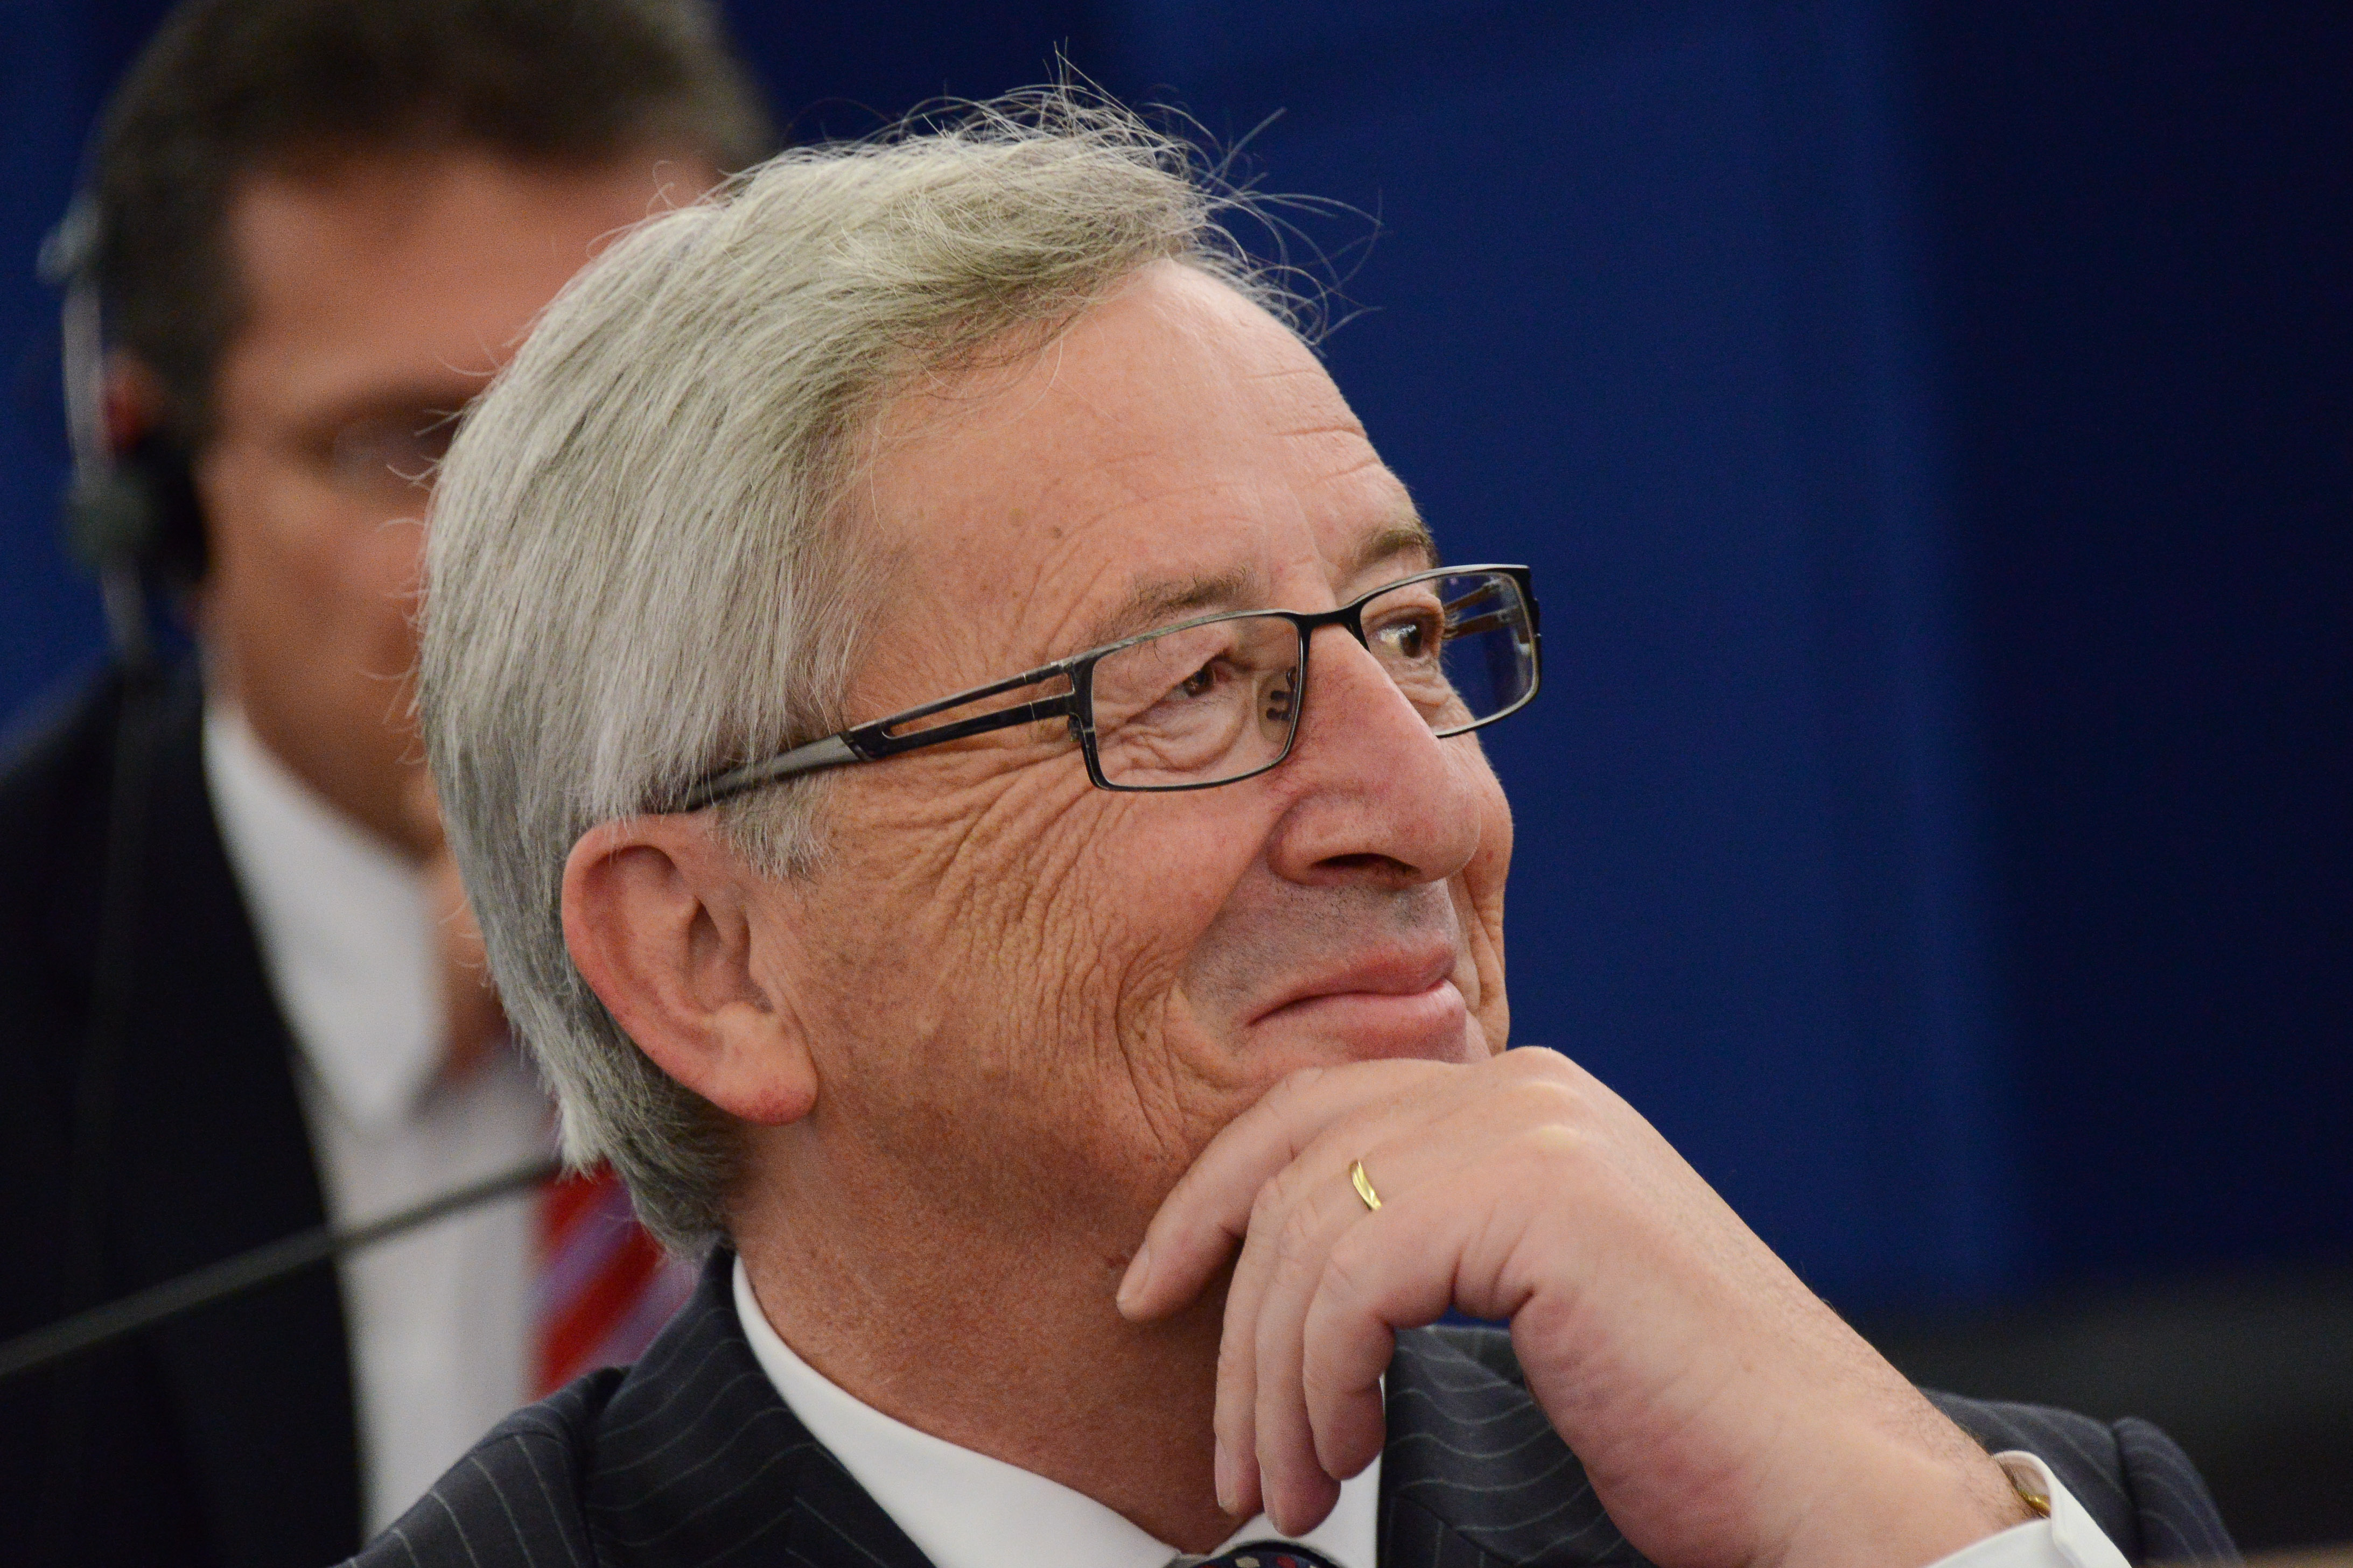 Are Juncker's ambitions and styles readily adopted and shared by individual Member States? Source: Flickr / Euractiv.com